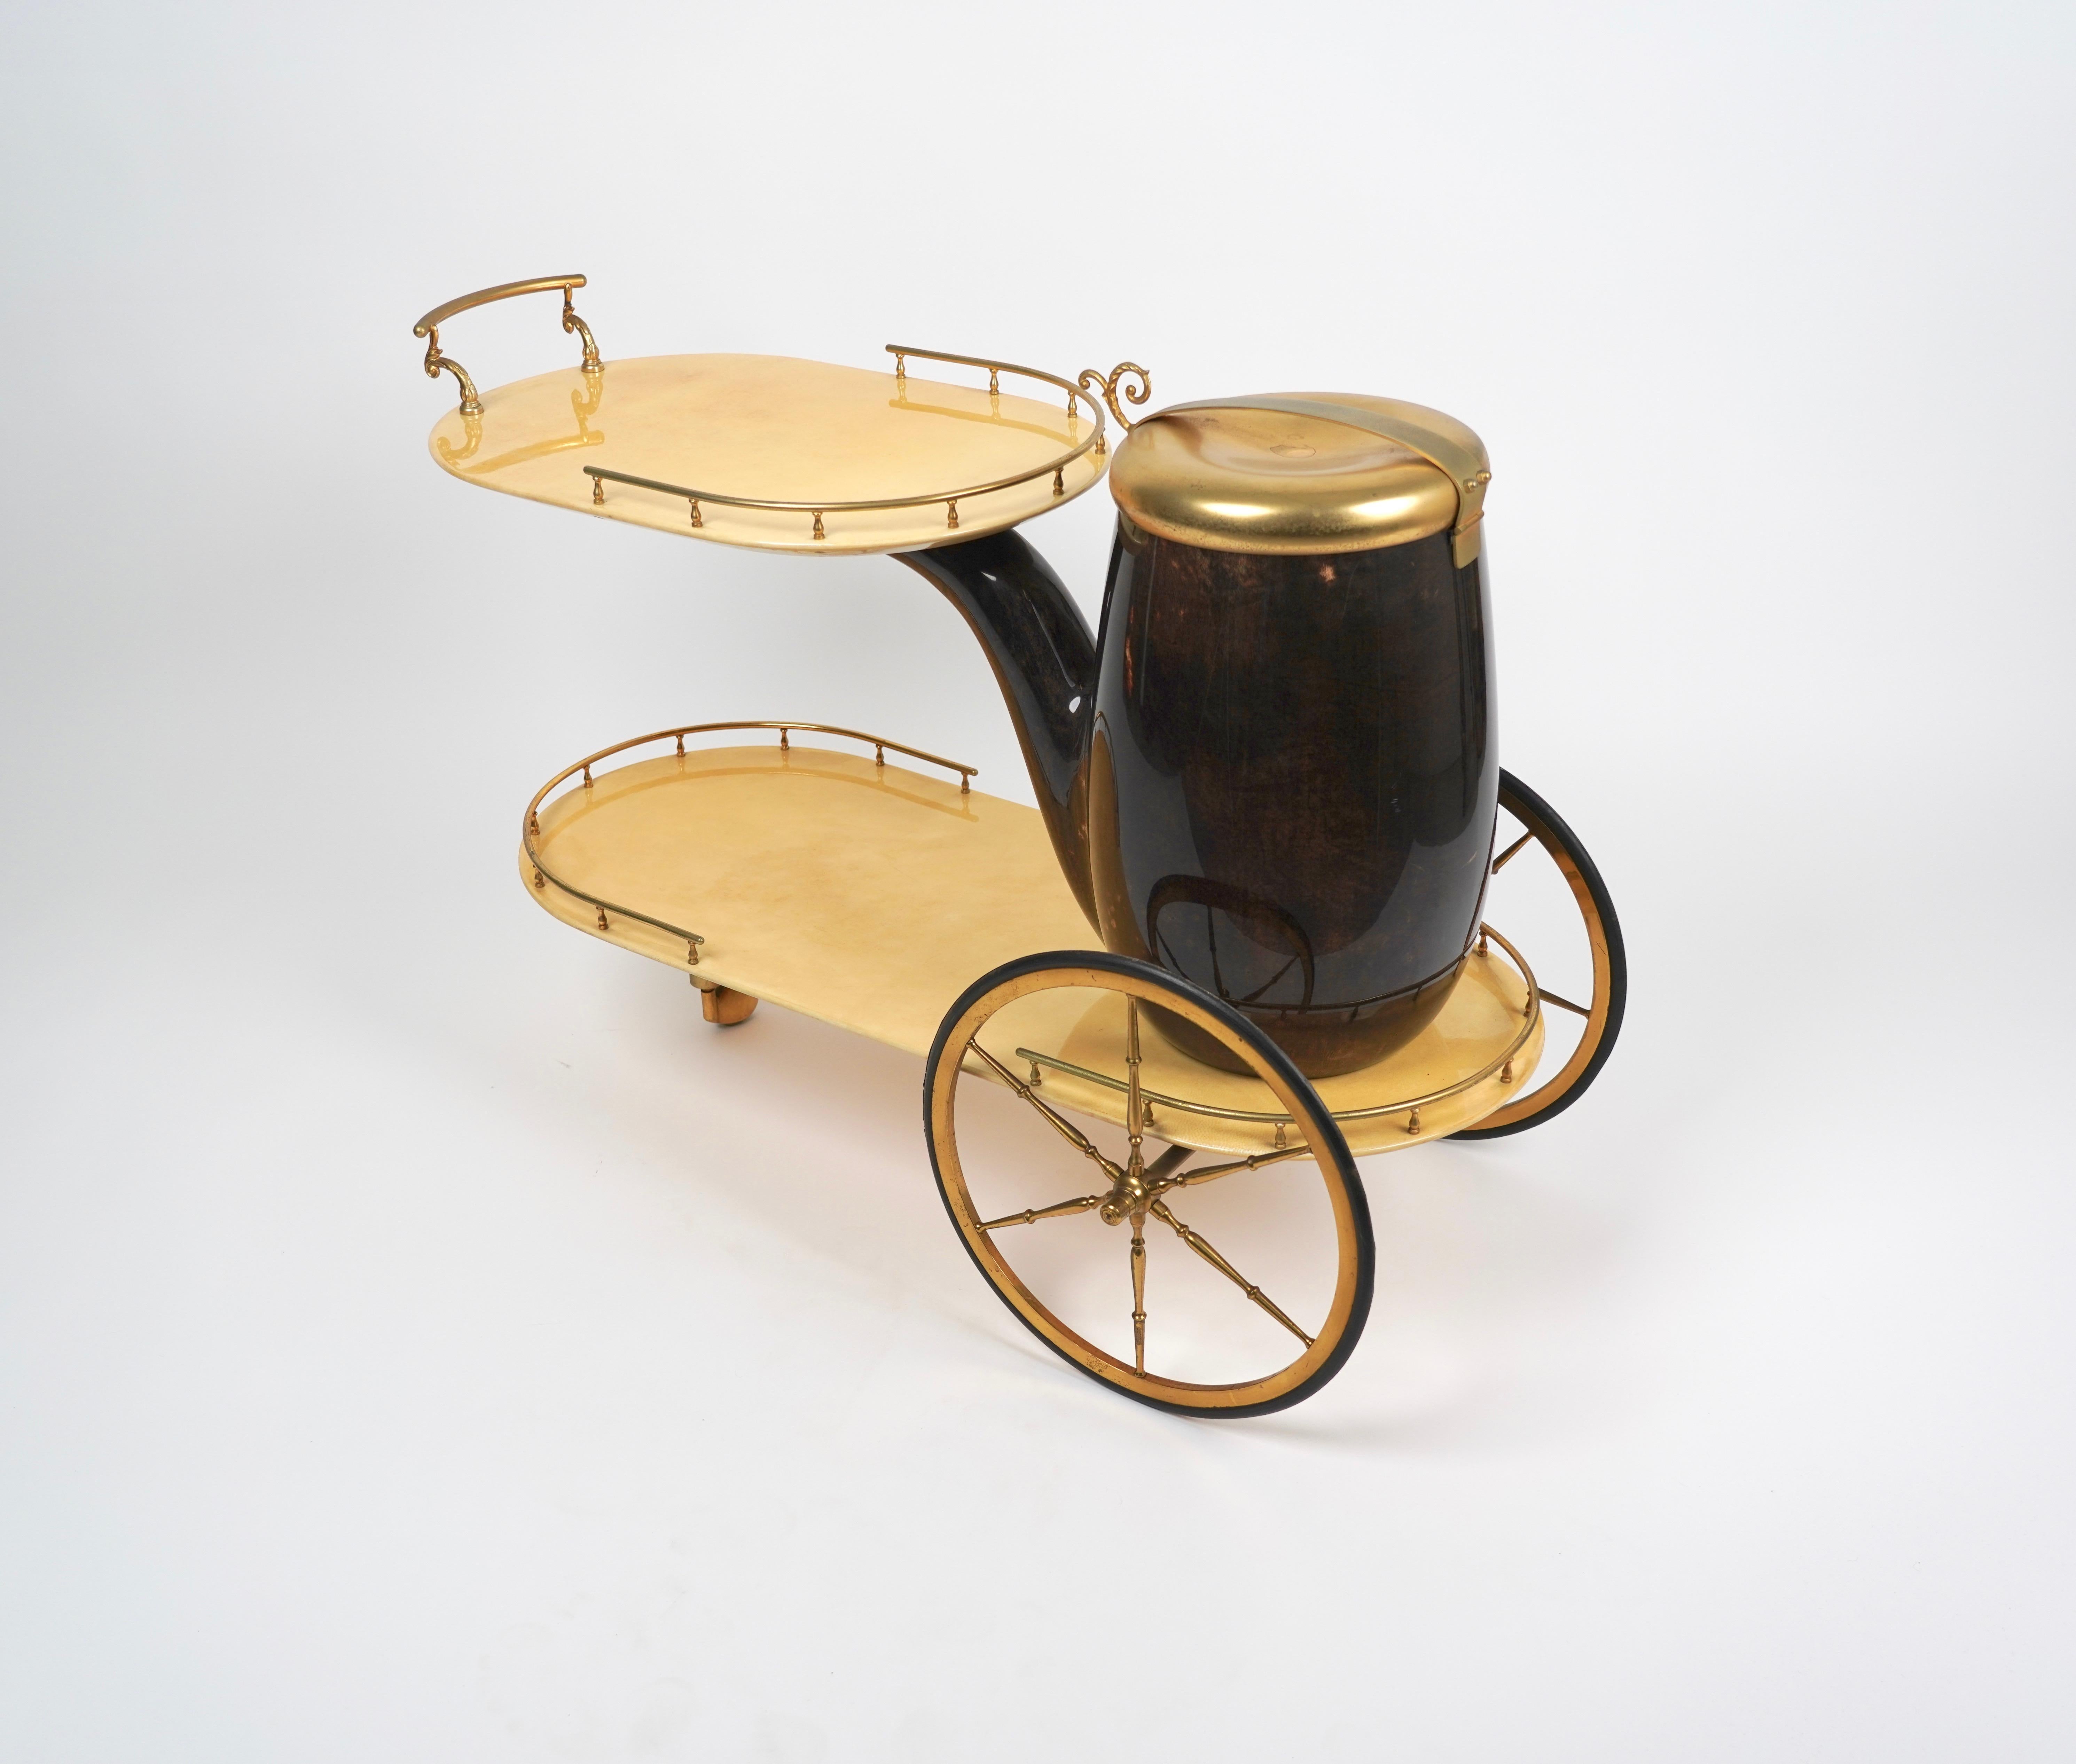 Aldo Tura design lacquered goatskin and brass bar cart trolley with 2 tiers, a pipe-shaped ice receptacle, and beautiful brass mounts. Made in Italy, circa 1960s.

One of the most enigmatic and polarizing figures to emerge in Italian design, Aldo